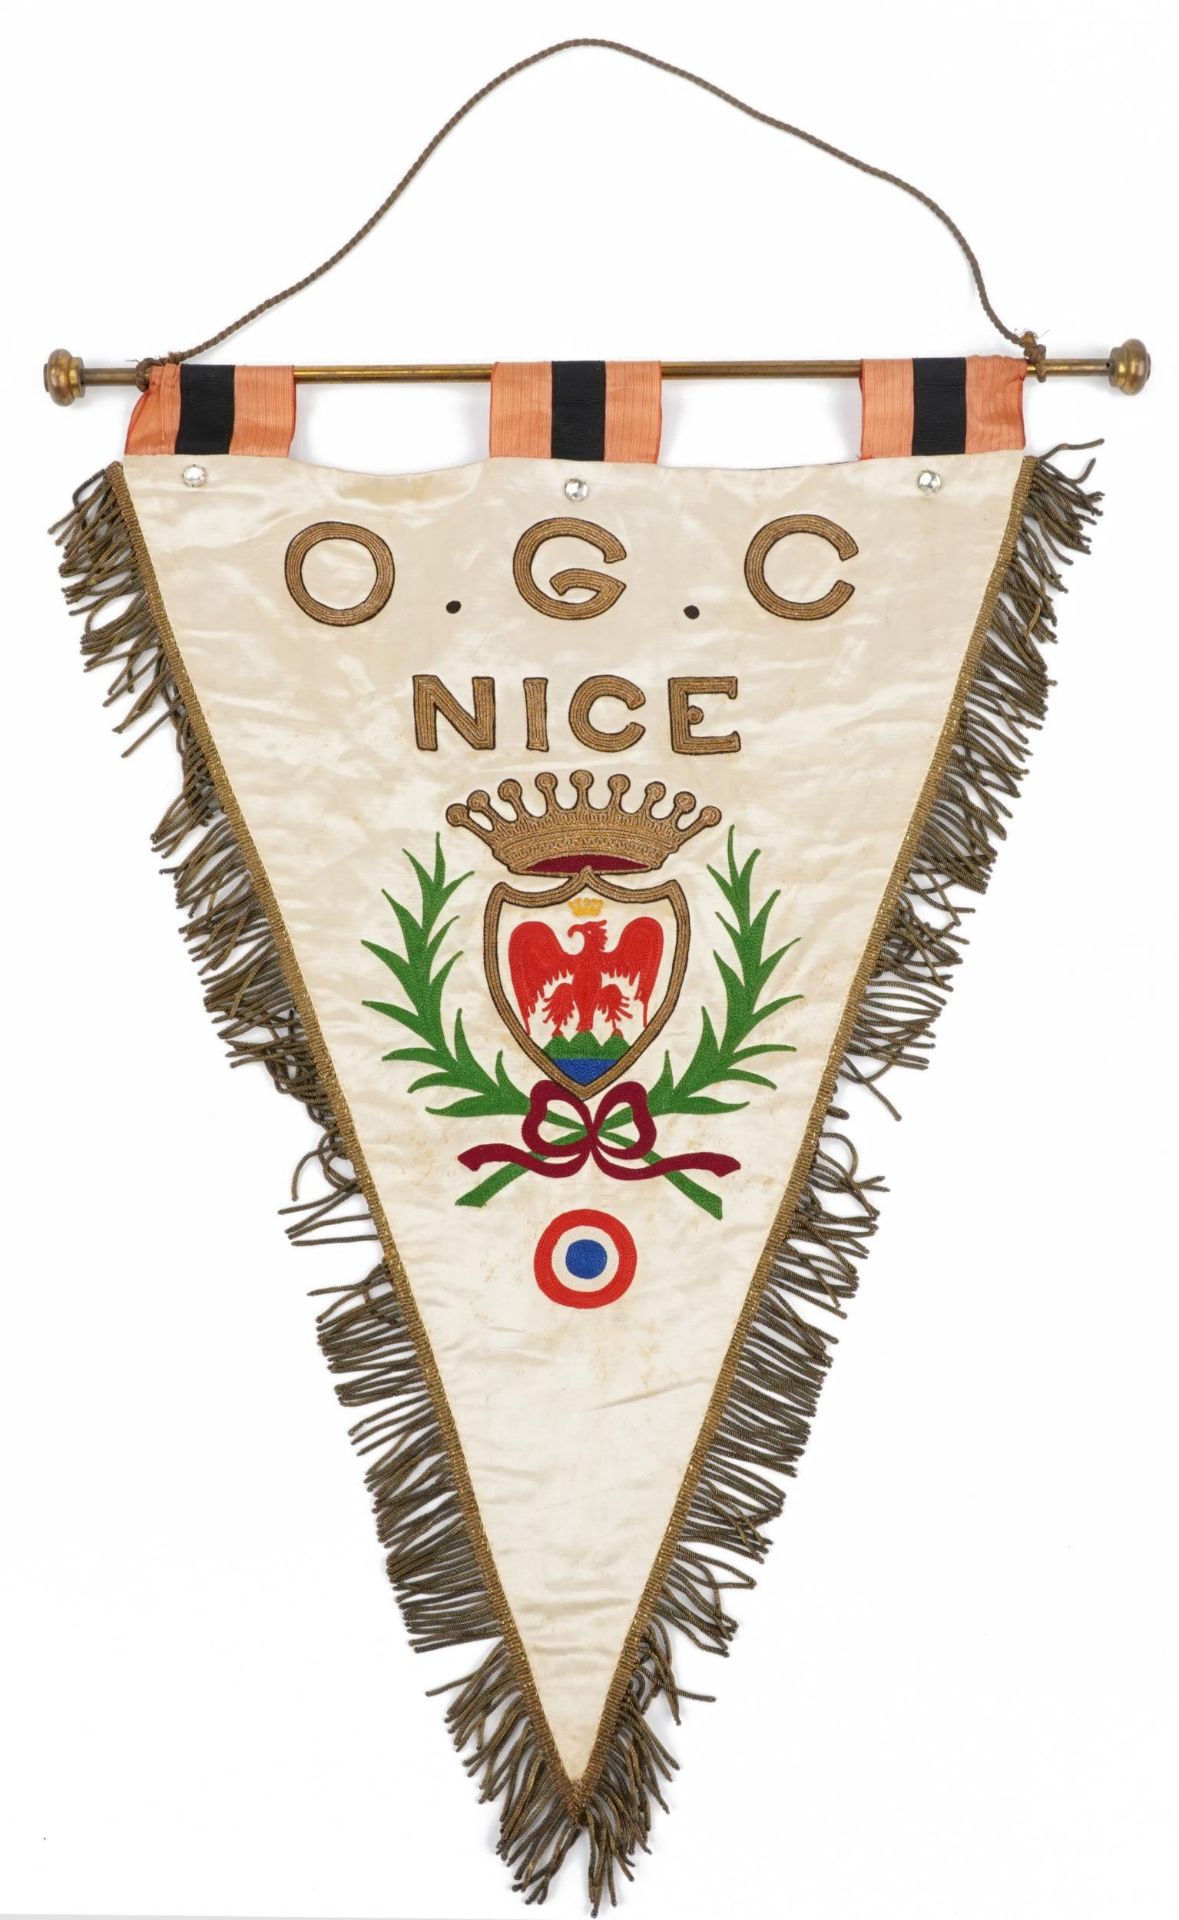 Footballing interest silk embroidered OGC Nice pennant, 62.5cm high : For further information on